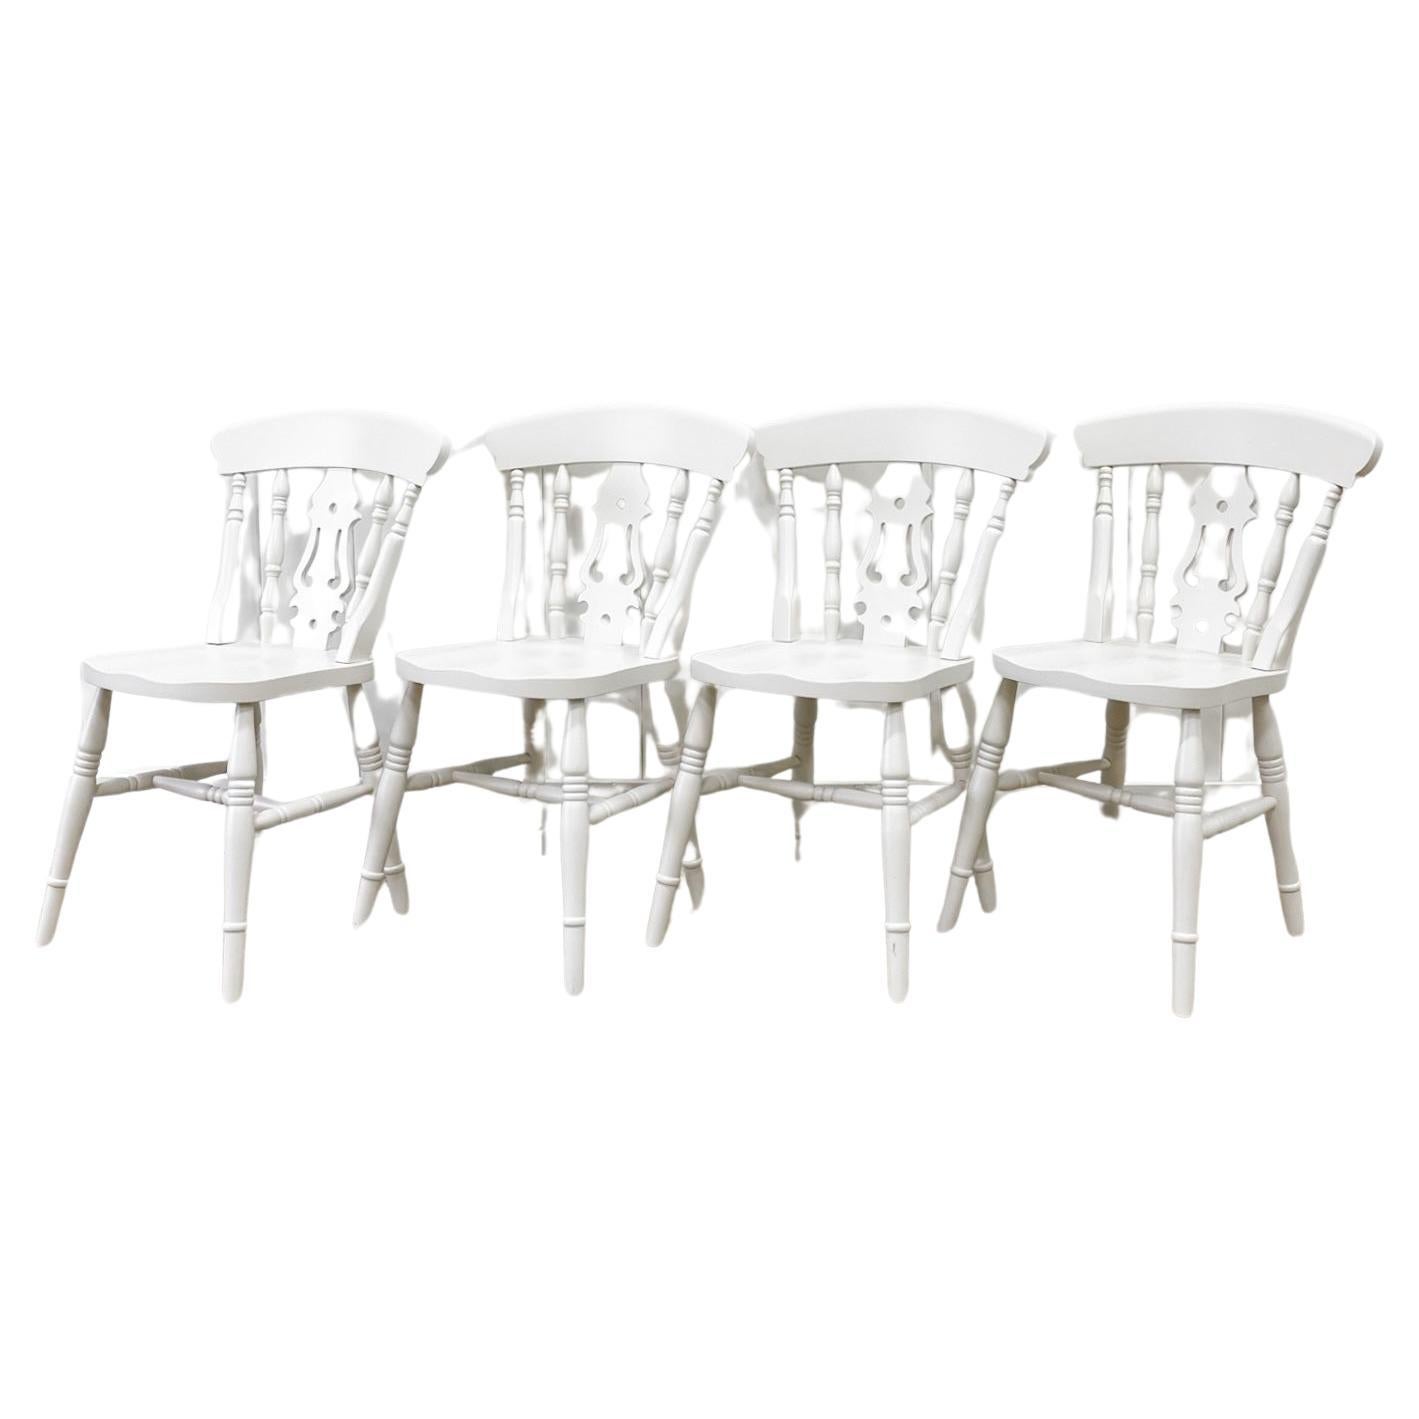 A Vintage Set of 4 White Fiddleback Back Chairs For Sale